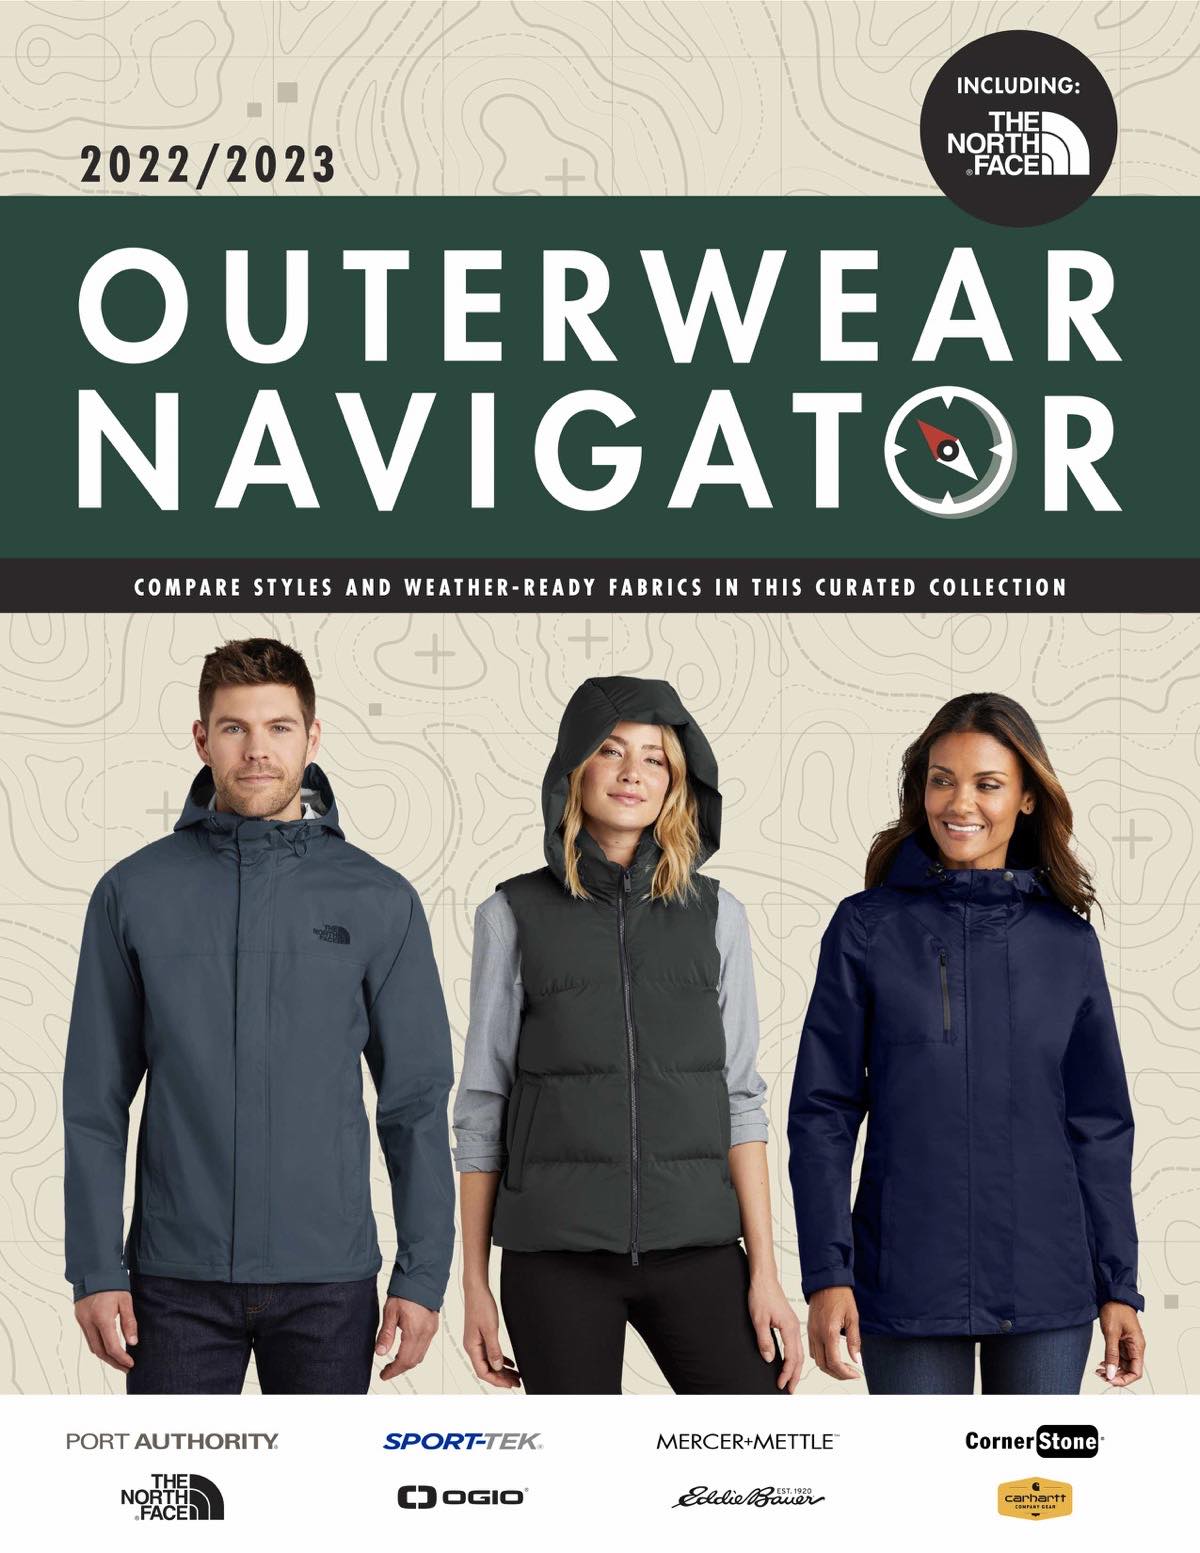 outerwear navigator, find your perfect outerwear